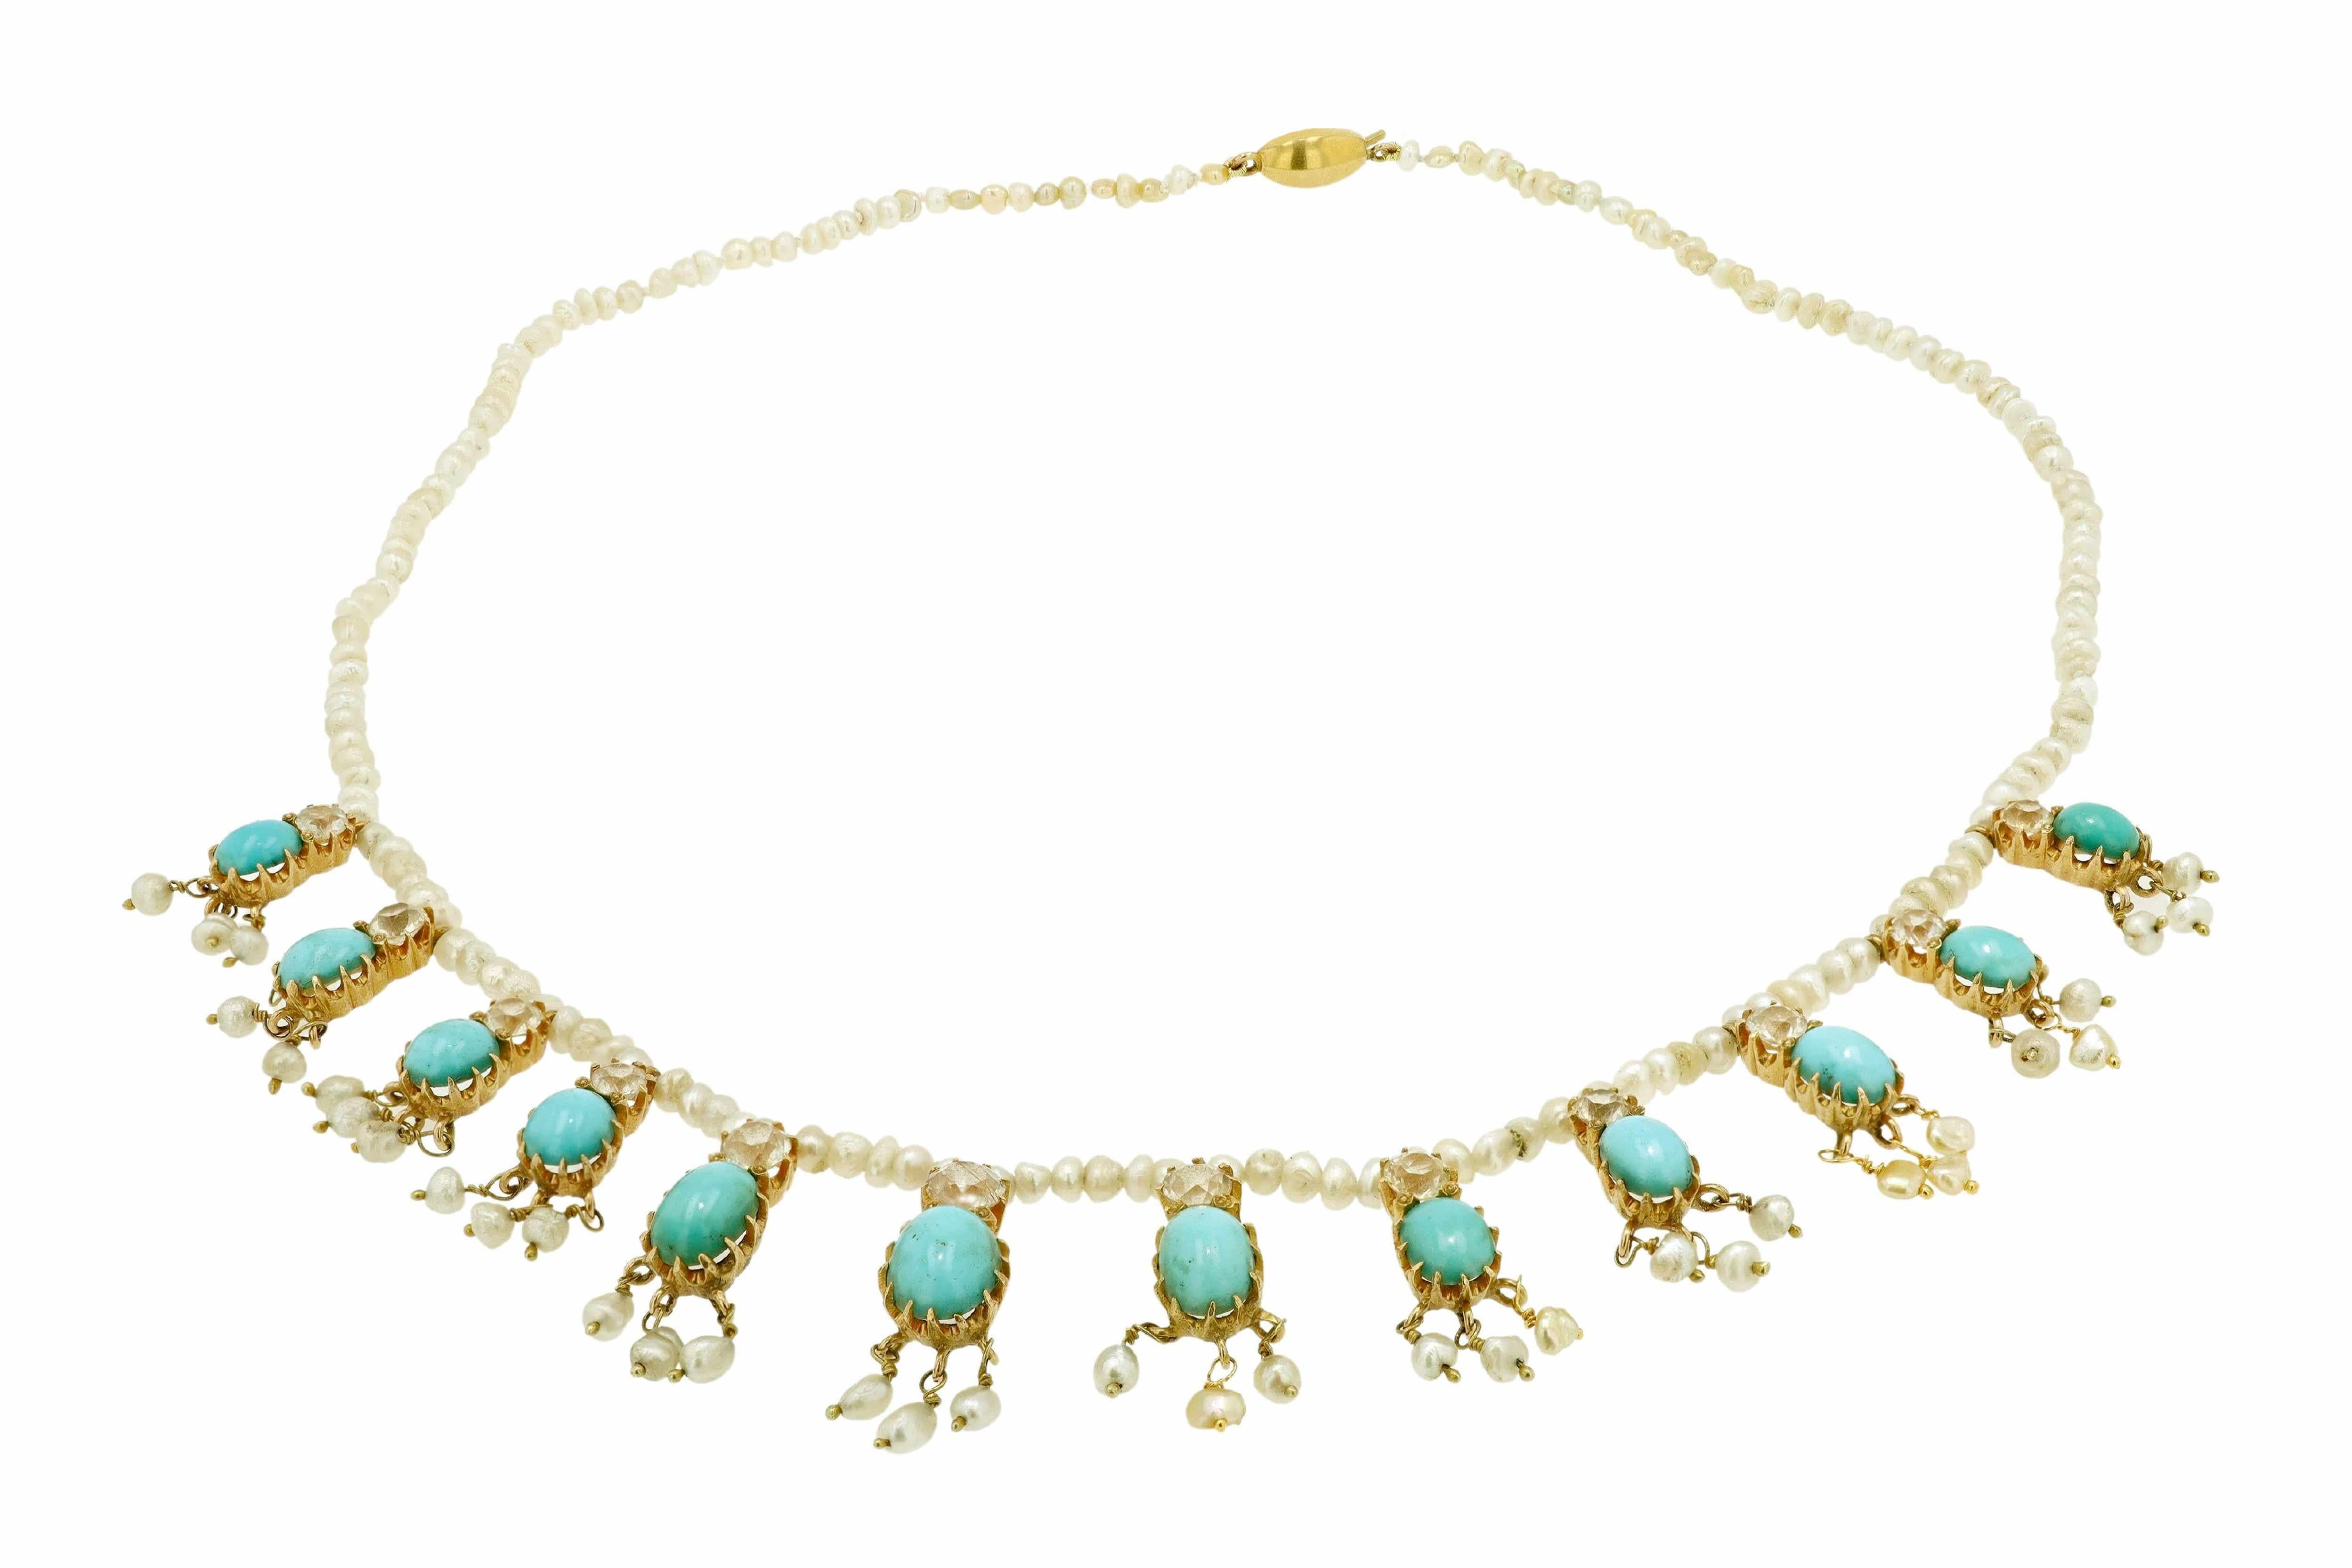 belle mariano necklace price